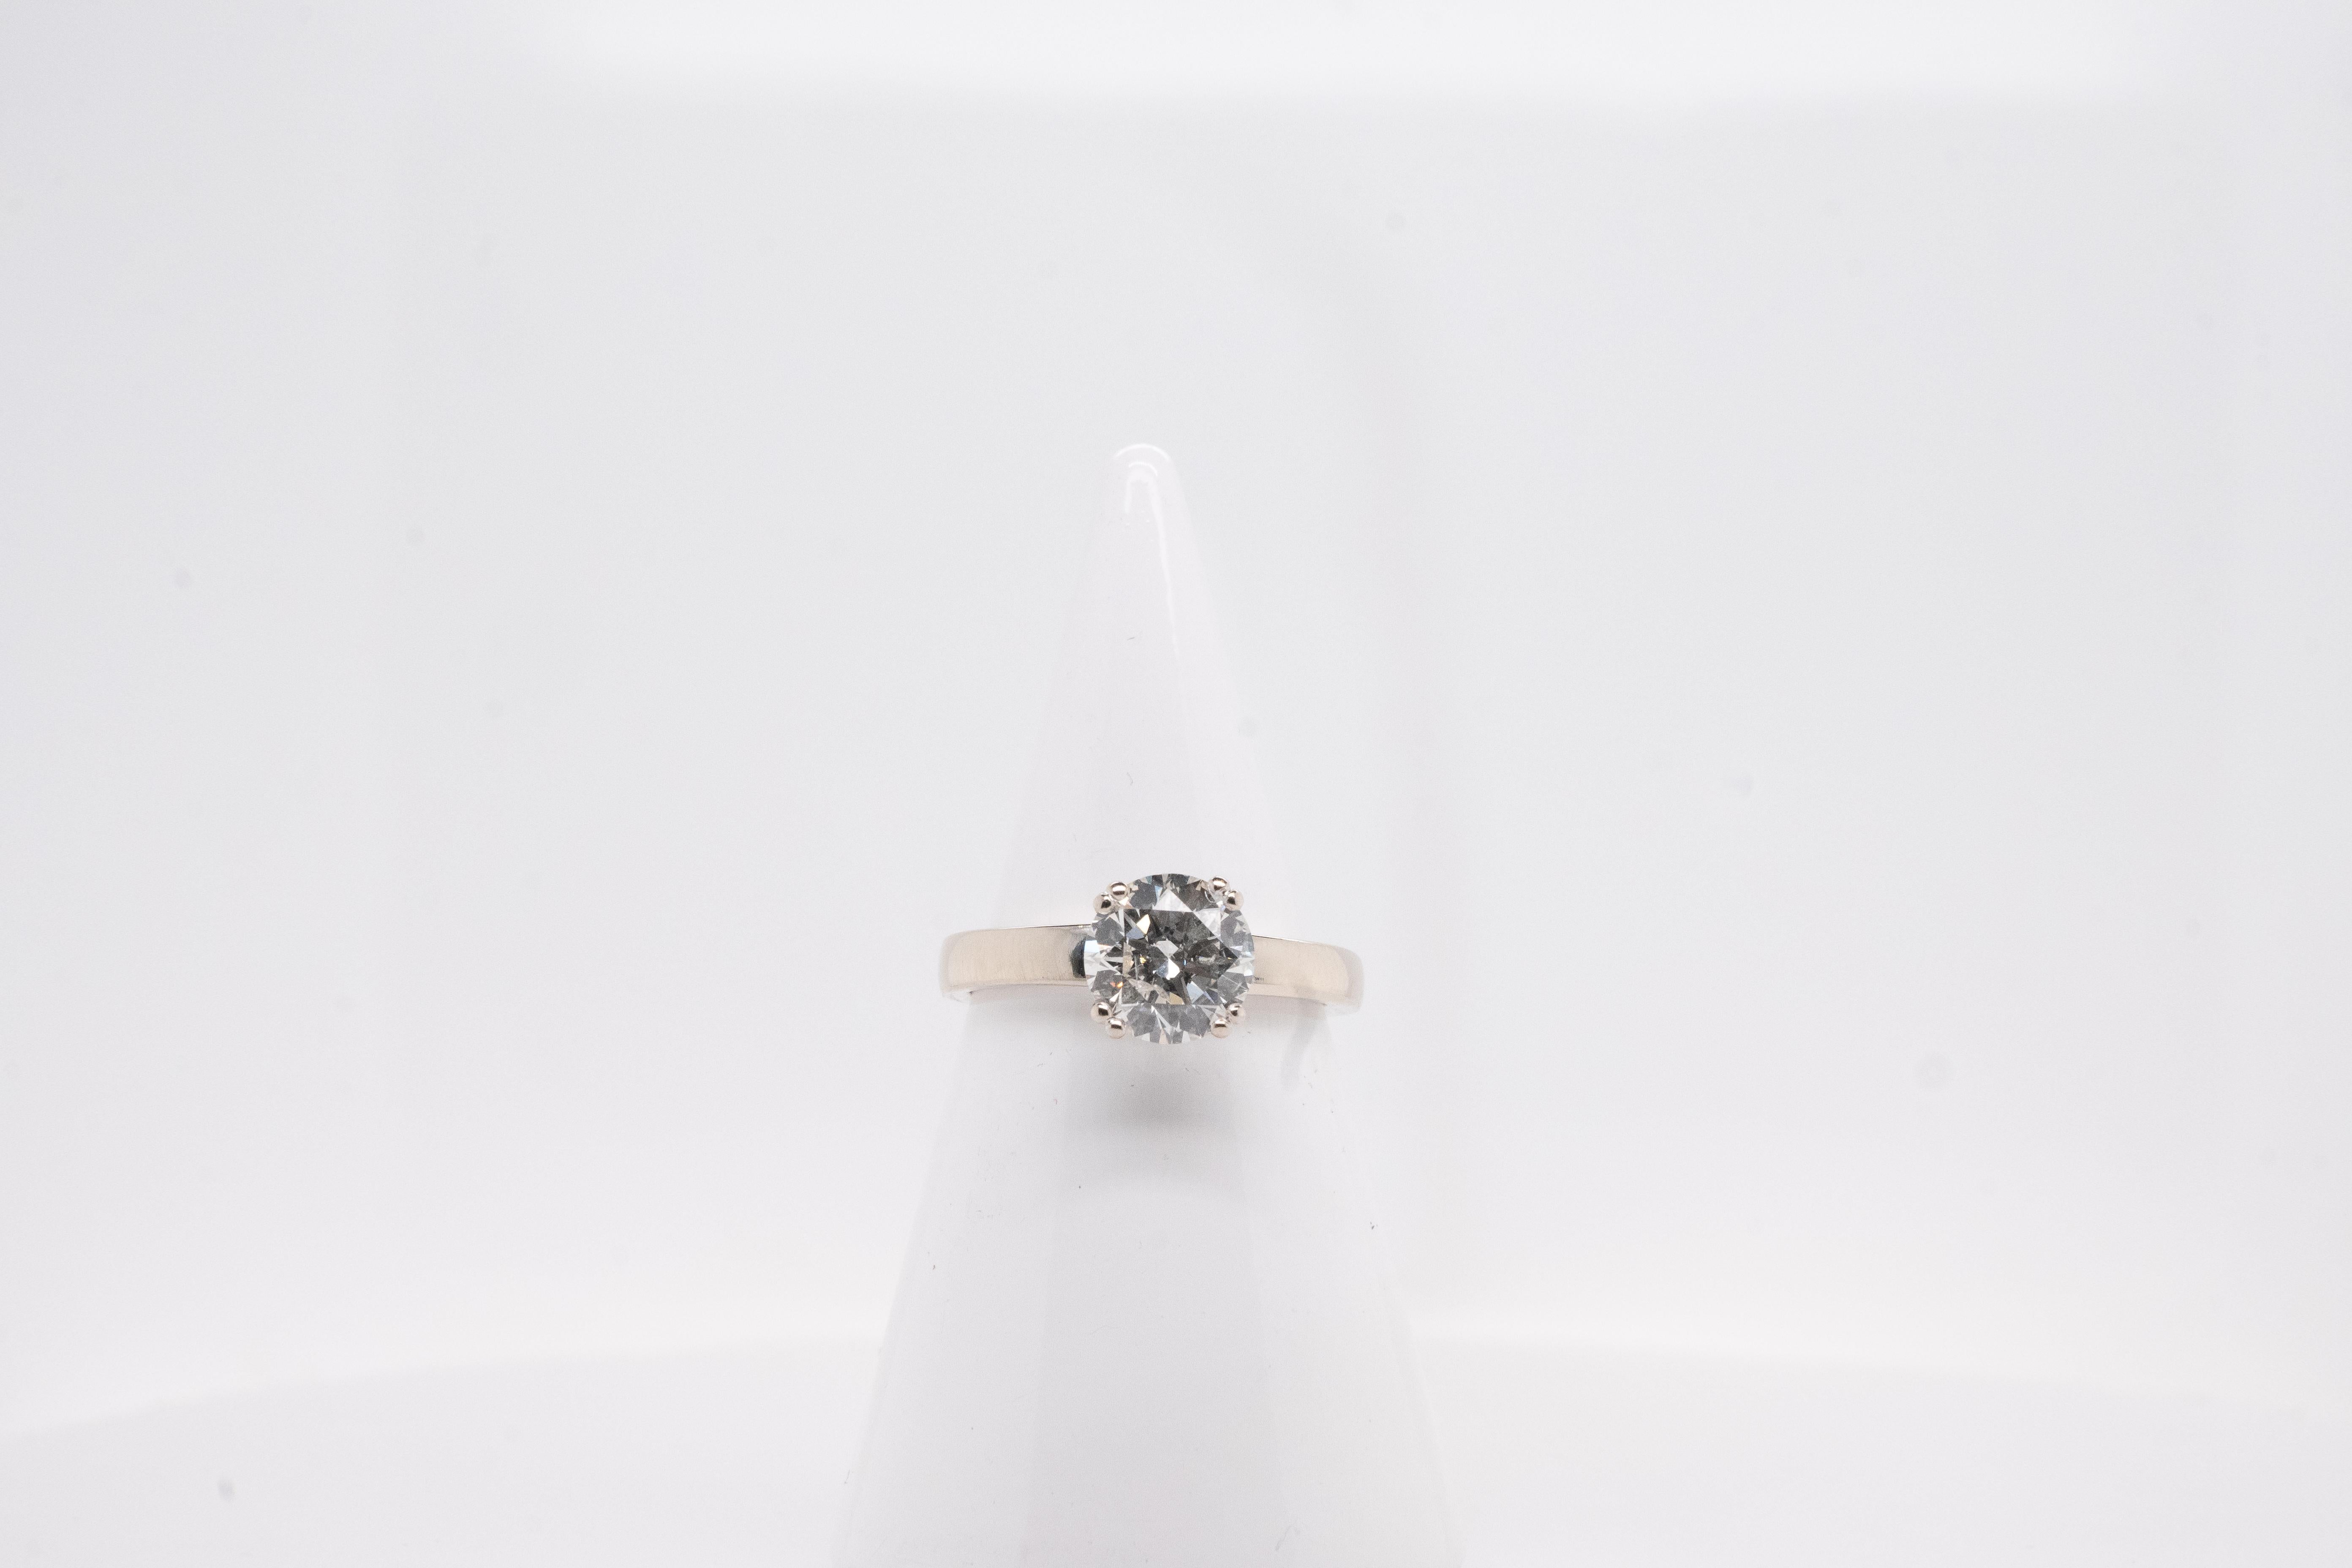 Discover the elegance of our white gold ring. This exceptional solitaire ring is set with a sparkling 1.51-carat H/p1 color central diamond. This natural stone captures the light with every movement.

The ring is adjusted to a French size of 50.5,